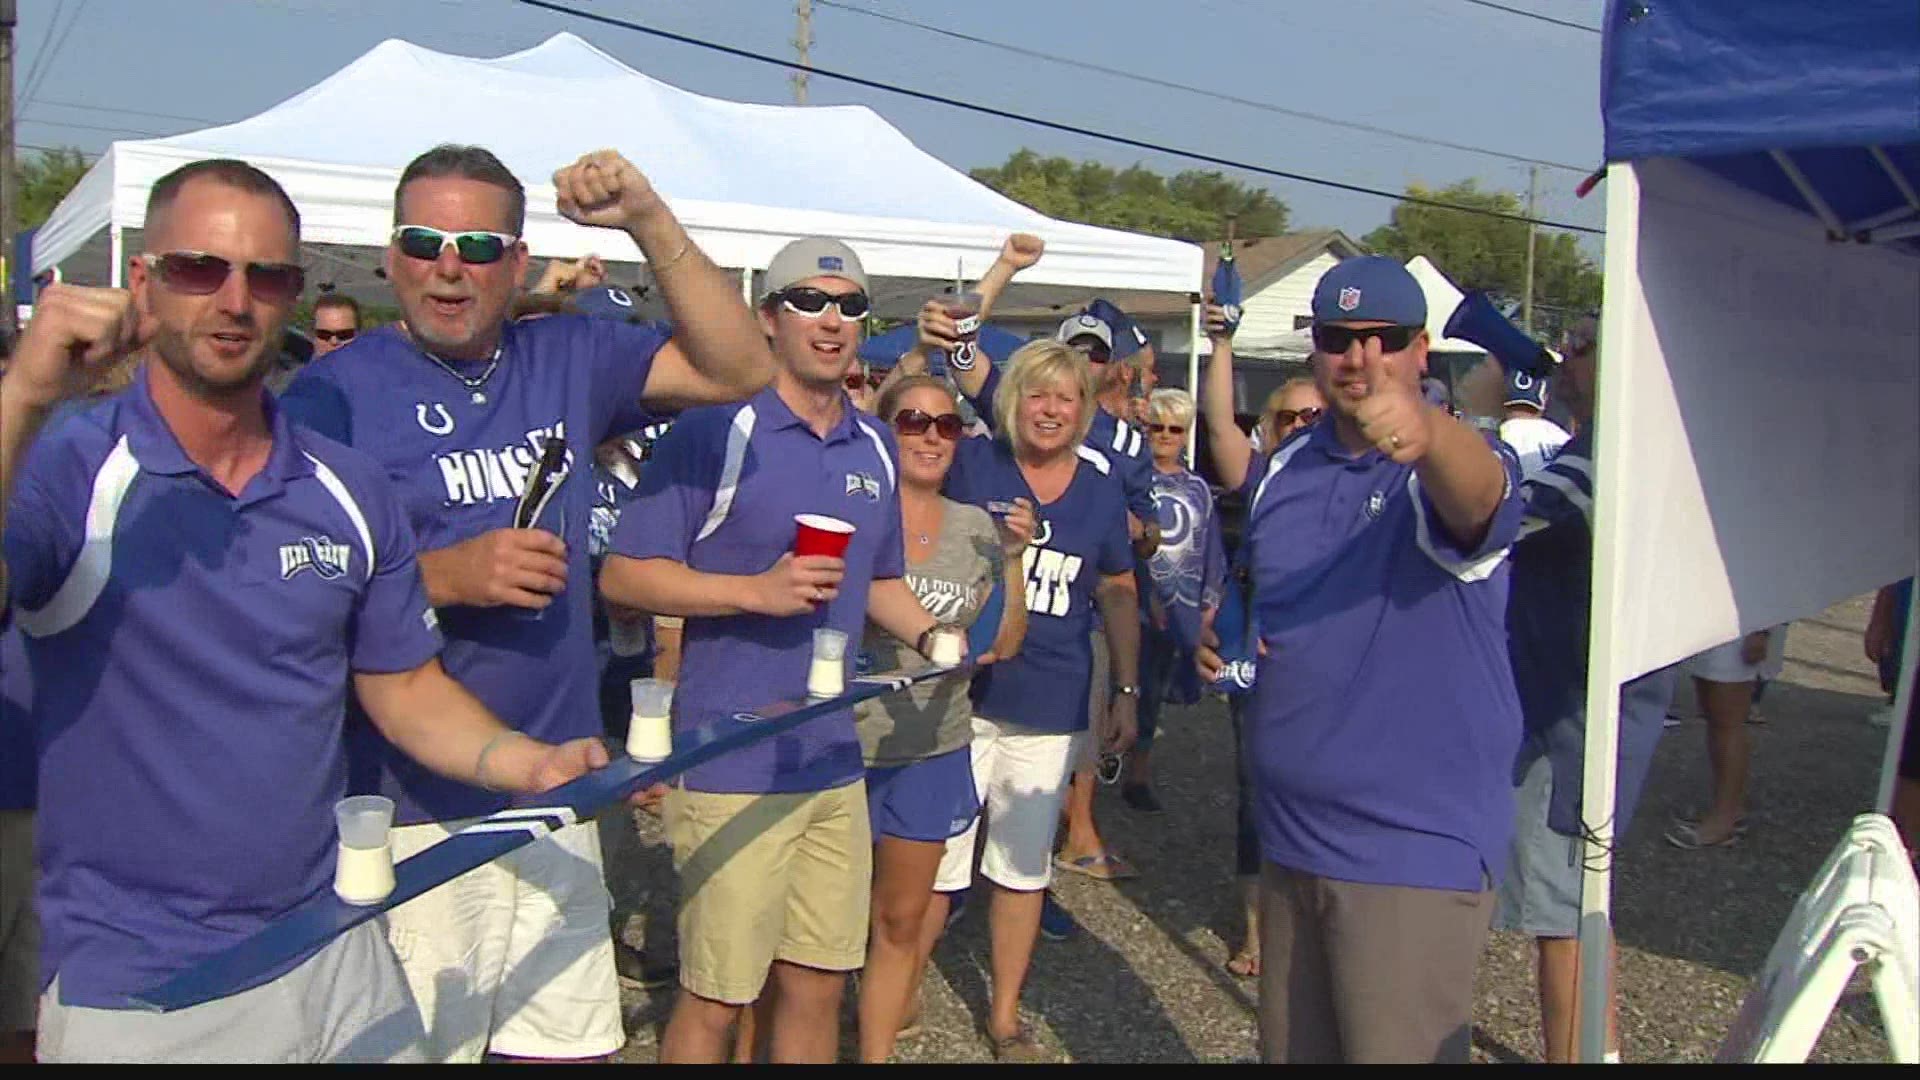 Fans react to the restrictions put in place ahead of the Colts season opener on Sunday, Sept. 13.